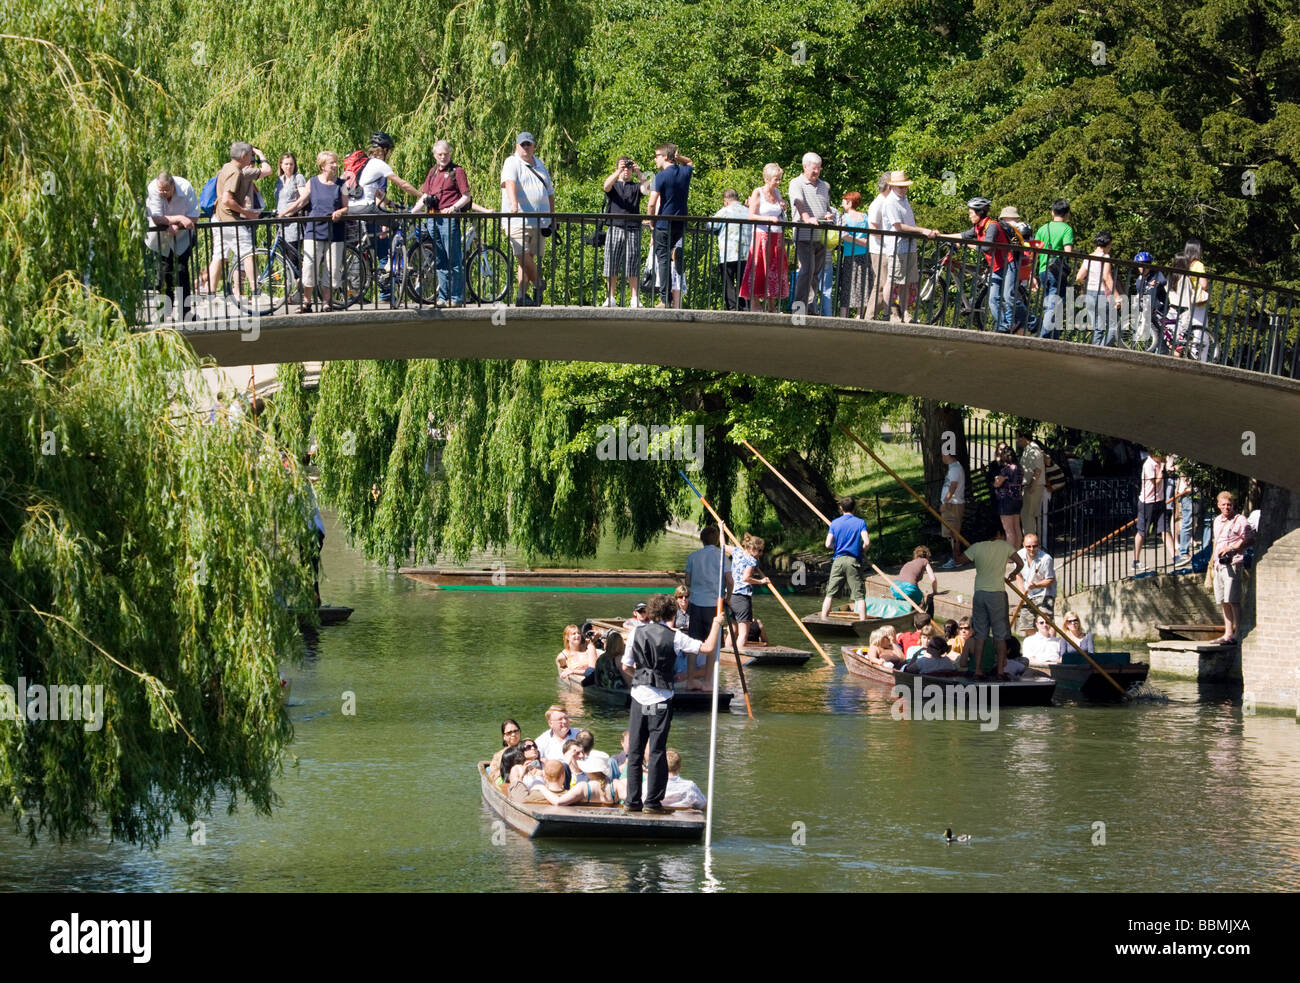 Punting on the River Cam at Garret Hostel Lane bridge in Cambridge, UK on a sunny summers day Stock Photo